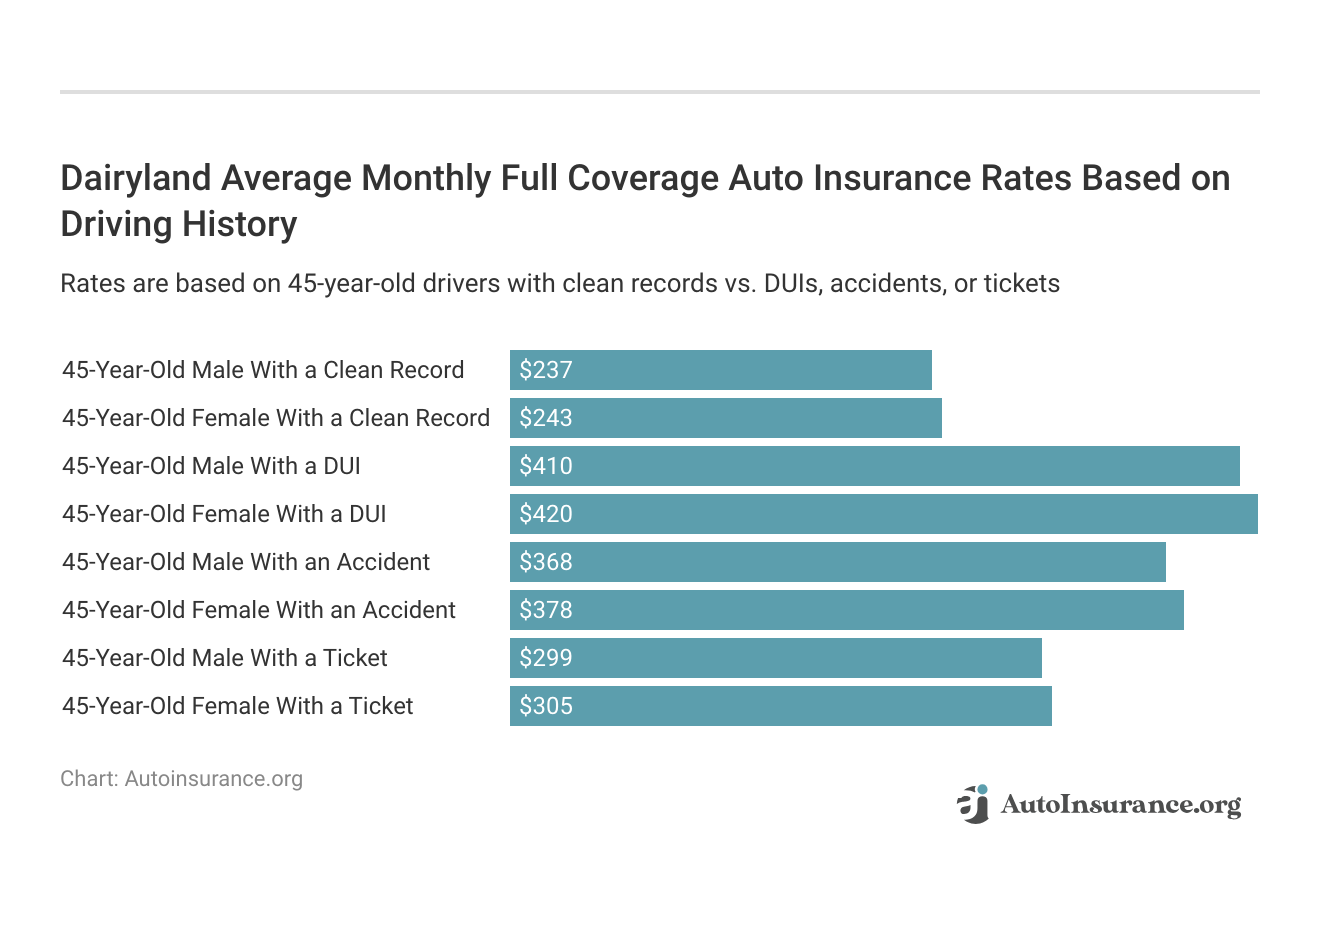 <h3>Dairyland Average Monthly Full Coverage Auto Insurance Rates Based on Driving History</h3>